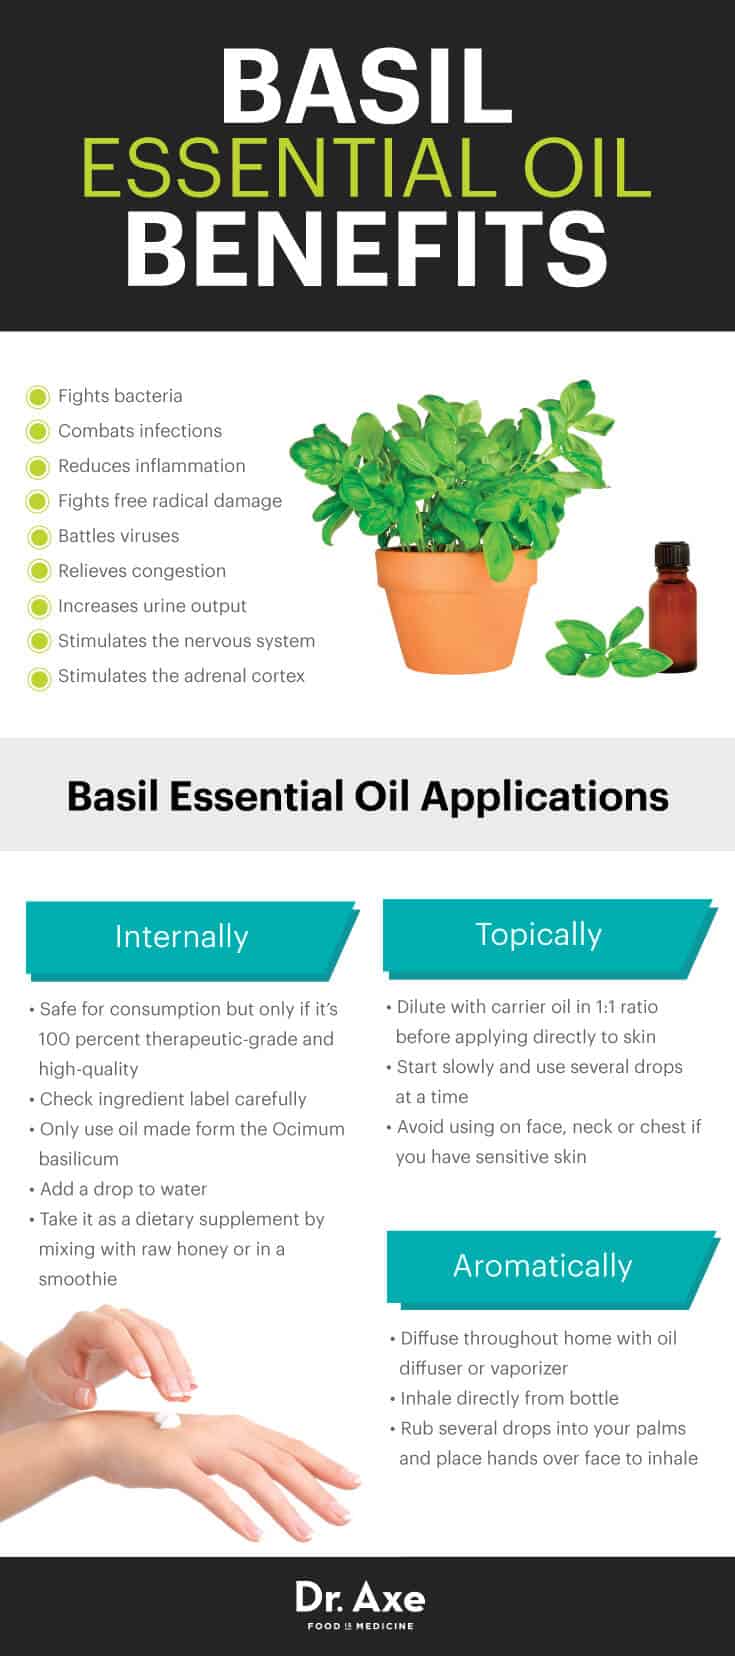 Basil essential oil benefits - Dr. Axe